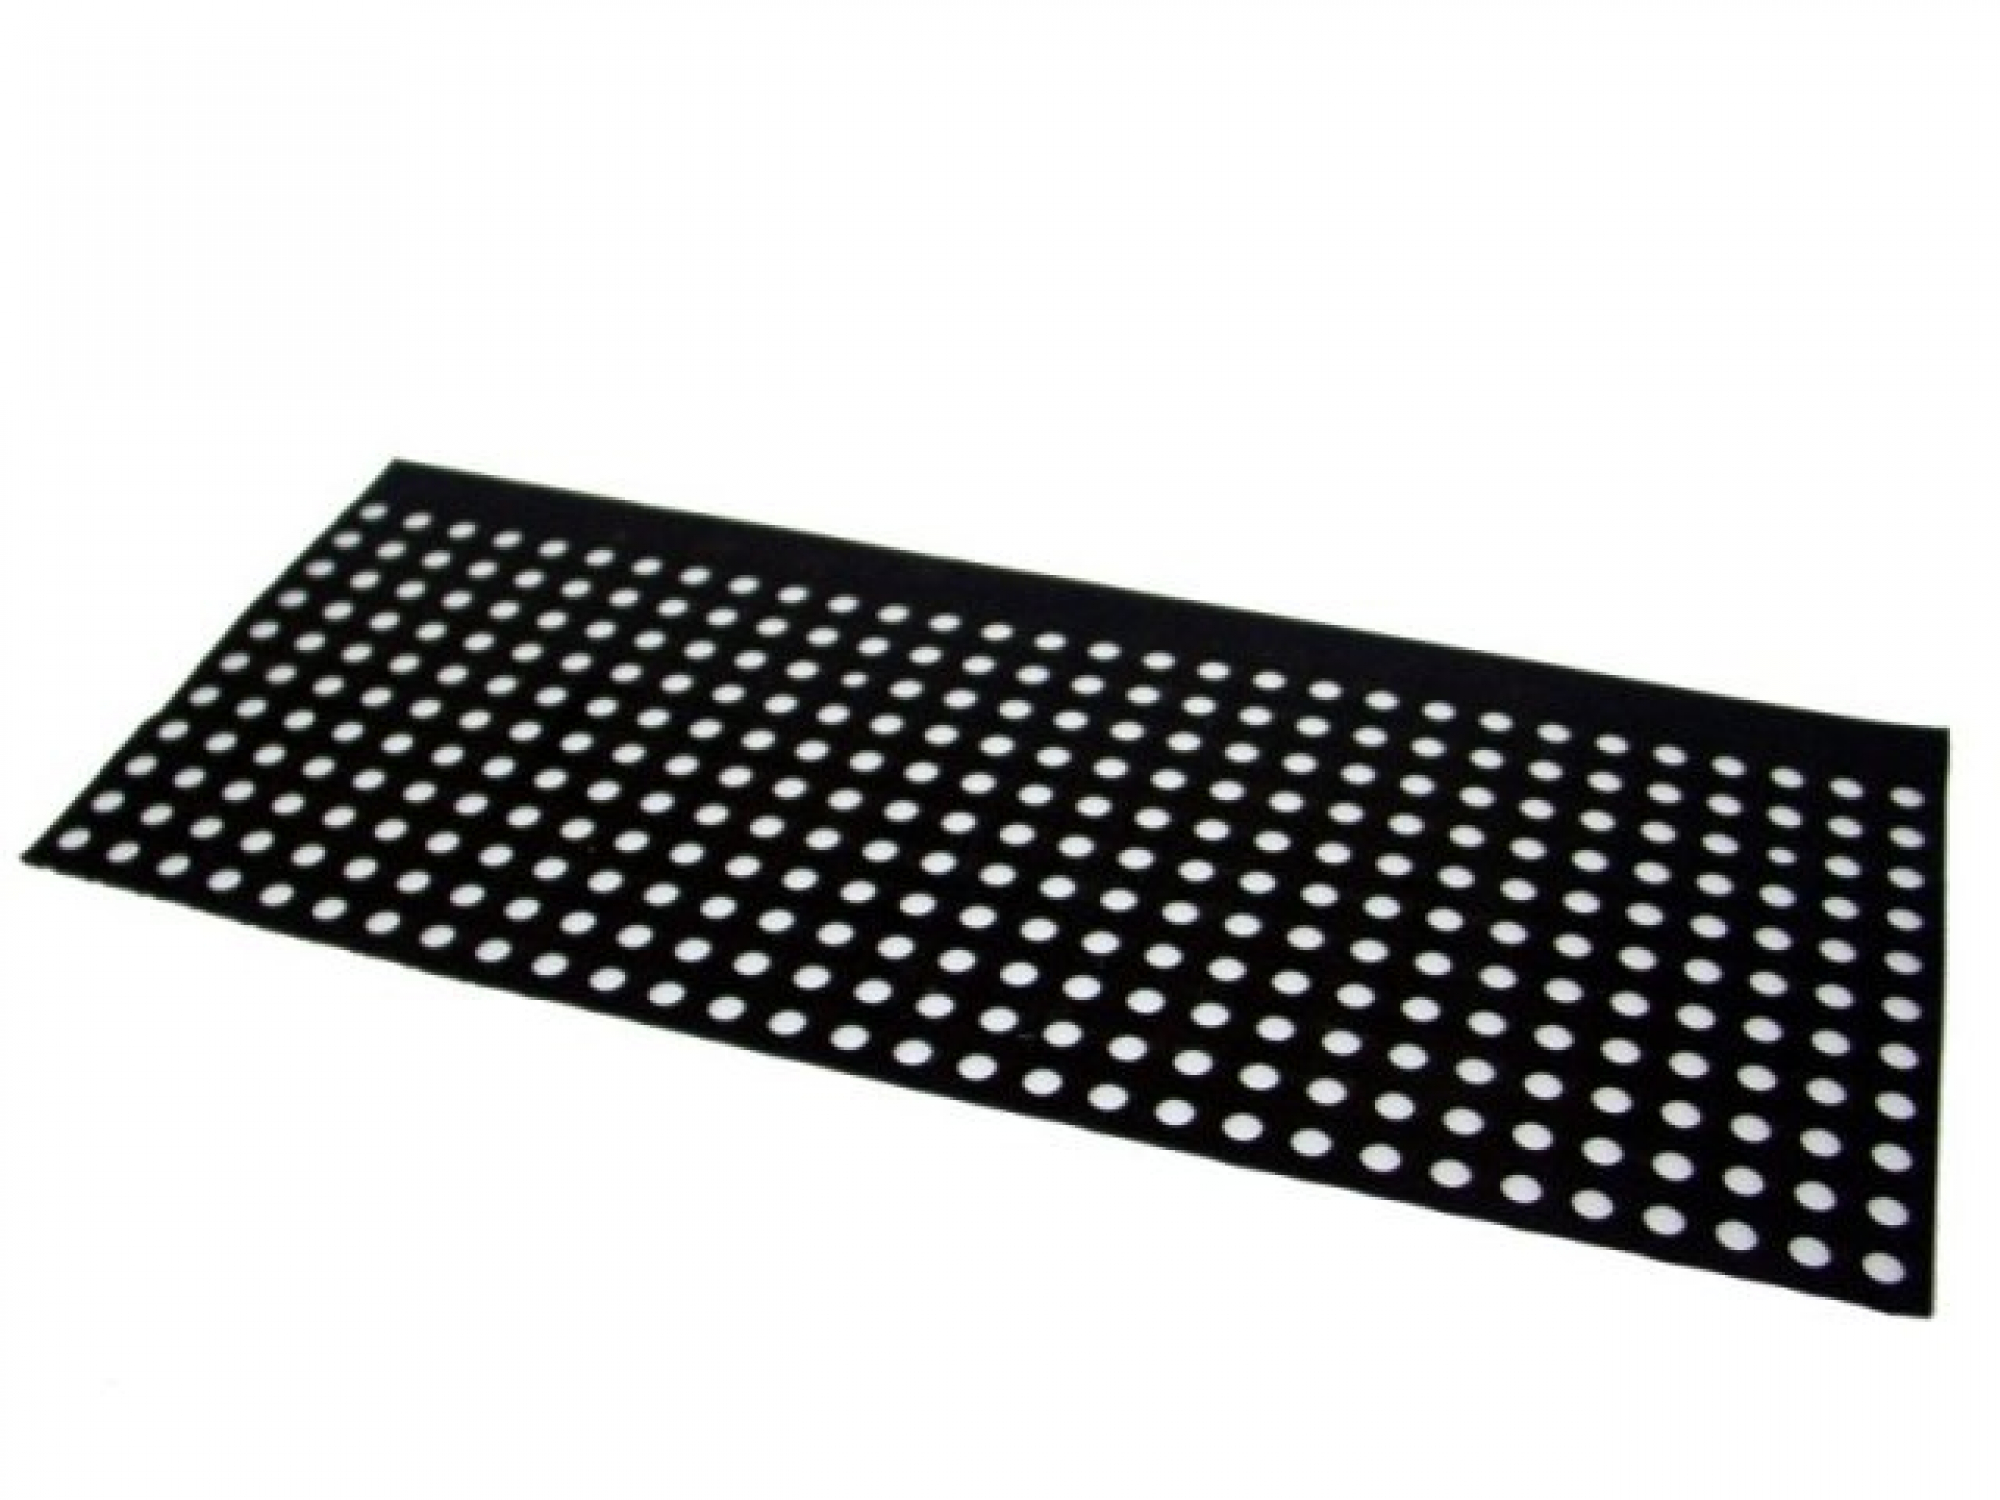 Perforated rubber mat 280 x 180 mm